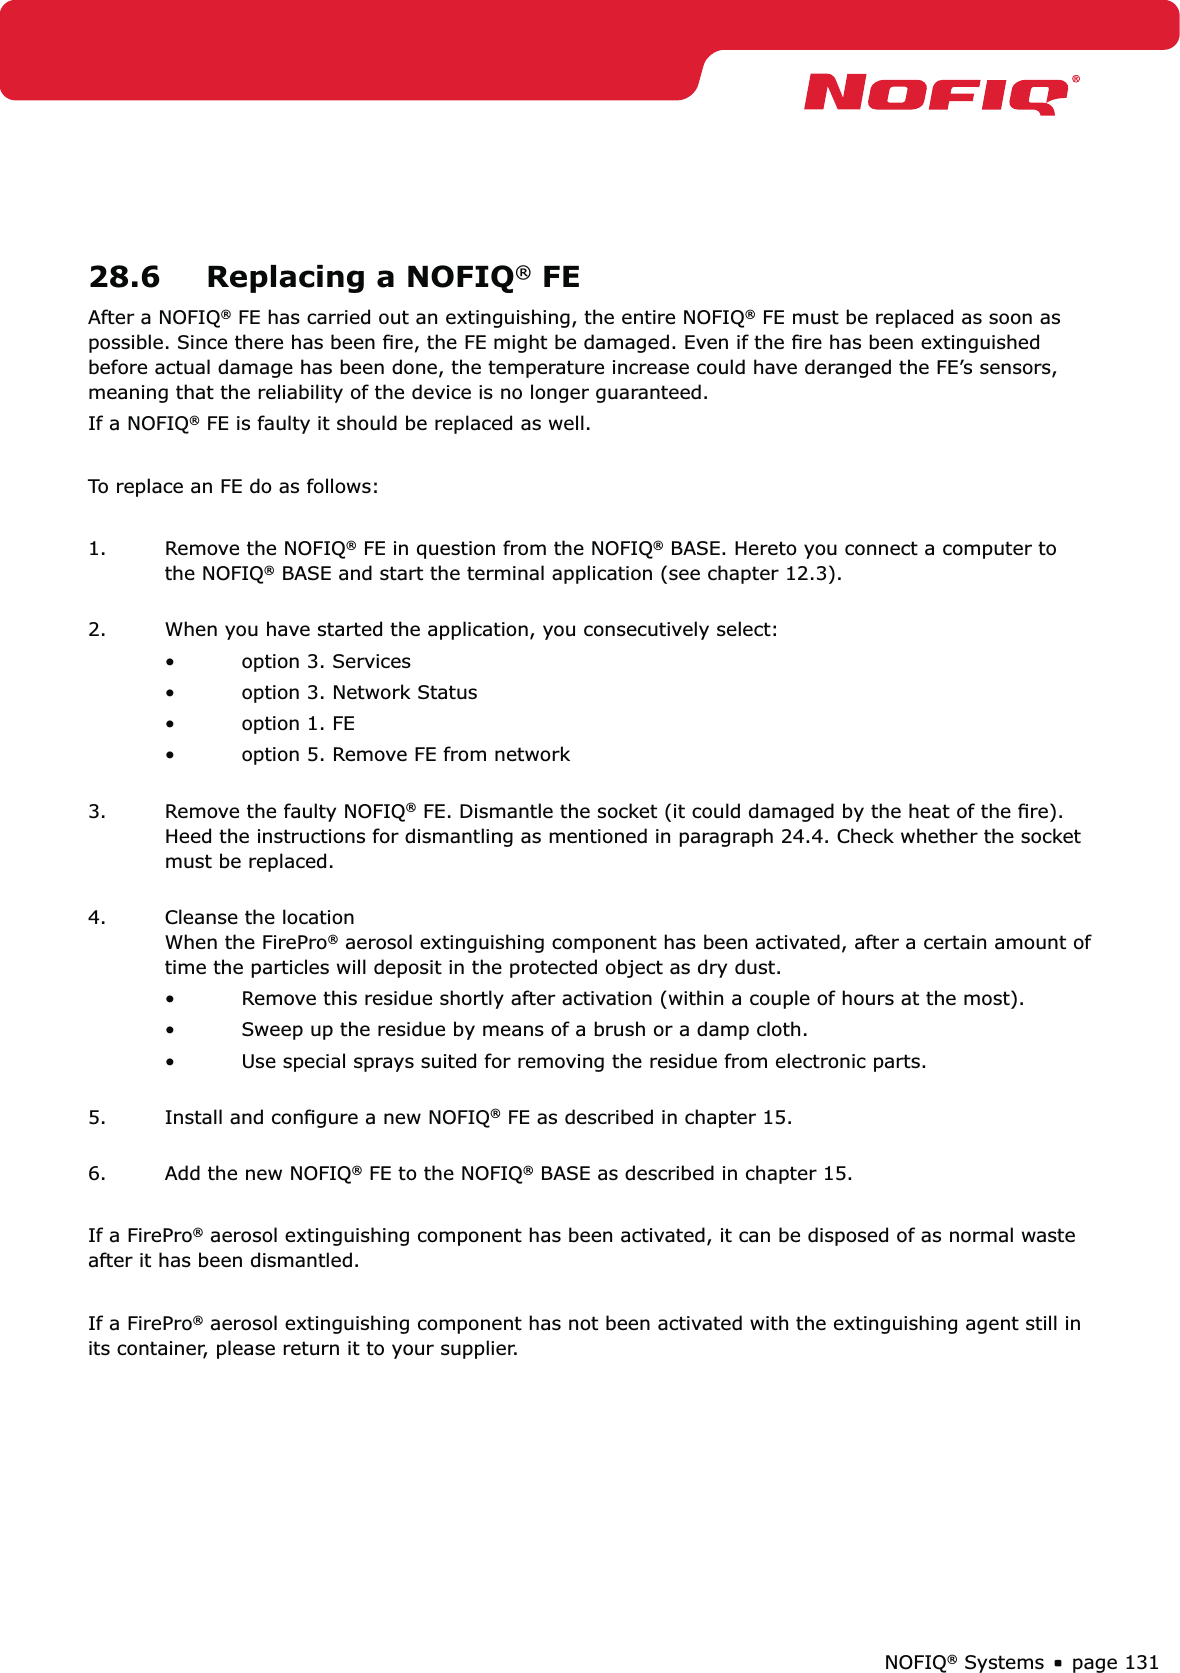 page 131NOFIQ® Systems28.6  Replacing a NOFIQ® FEAfter a NOFIQ® FE has carried out an extinguishing, the entire NOFIQ® FE must be replaced as soon as possible. Since there has been ﬁre, the FE might be damaged. Even if the ﬁre has been extinguished before actual damage has been done, the temperature increase could have deranged the FE’s sensors, meaning that the reliability of the device is no longer guaranteed. If a NOFIQ® FE is faulty it should be replaced as well.To replace an FE do as follows:1.  Remove the NOFIQ® FE in question from the NOFIQ® BASE. Hereto you connect a computer to the NOFIQ® BASE and start the terminal application (see chapter 12.3). 2.  When you have started the application, you consecutively select:option 3. Services• option 3. Network Status• option 1. FE• option 5. Remove FE from network • 3.  Remove the faulty NOFIQ® FE. Dismantle the socket (it could damaged by the heat of the ﬁre). Heed the instructions for dismantling as mentioned in paragraph 24.4. Check whether the socket must be replaced. 4.  Cleanse the location When the FirePro® aerosol extinguishing component has been activated, after a certain amount of time the particles will deposit in the protected object as dry dust.Remove this residue shortly after activation (within a couple of hours at the most).• Sweep up the residue by means of a brush or a damp cloth.• Use special sprays suited for removing the residue from electronic parts. • 5.  Install and conﬁgure a new NOFIQ® FE as described in chapter 15. 6.  Add the new NOFIQ® FE to the NOFIQ® BASE as described in chapter 15.If a FirePro® aerosol extinguishing component has been activated, it can be disposed of as normal waste after it has been dismantled.If a FirePro® aerosol extinguishing component has not been activated with the extinguishing agent still in its container, please return it to your supplier.